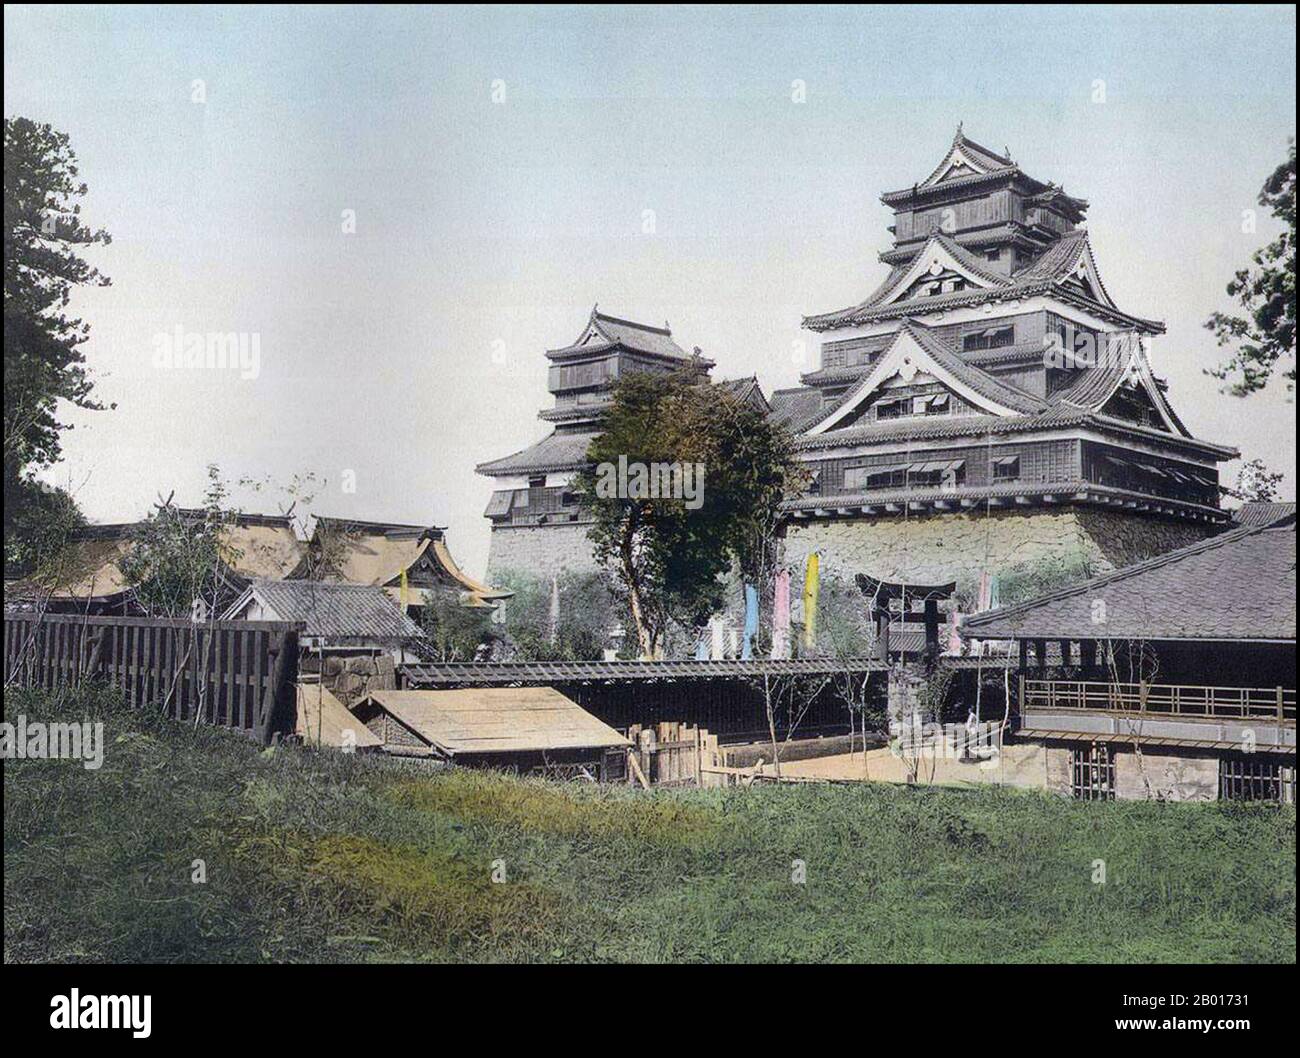 Japan: The Castle, Kumamoto, c. 1895.  Kumamoto is the capital city of Kumamoto Prefecture on the island of Kyūshū, Japan. Kato Kiyomasa, a contemporary of Toyotomi Hideyoshi, was made daimyo of half of the (old) administrative region of Higo in 1588. After that, Kiyomasa built Kumamoto Castle. Due to its many innovative defensive designs, Kumamoto Castle was considered impregnable, and Kiyomasa enjoyed a reputation as one of the finest castle-builders in Japanese history. Today the donjon (central keep) is a concrete reconstruction built in the 1970s. Stock Photo